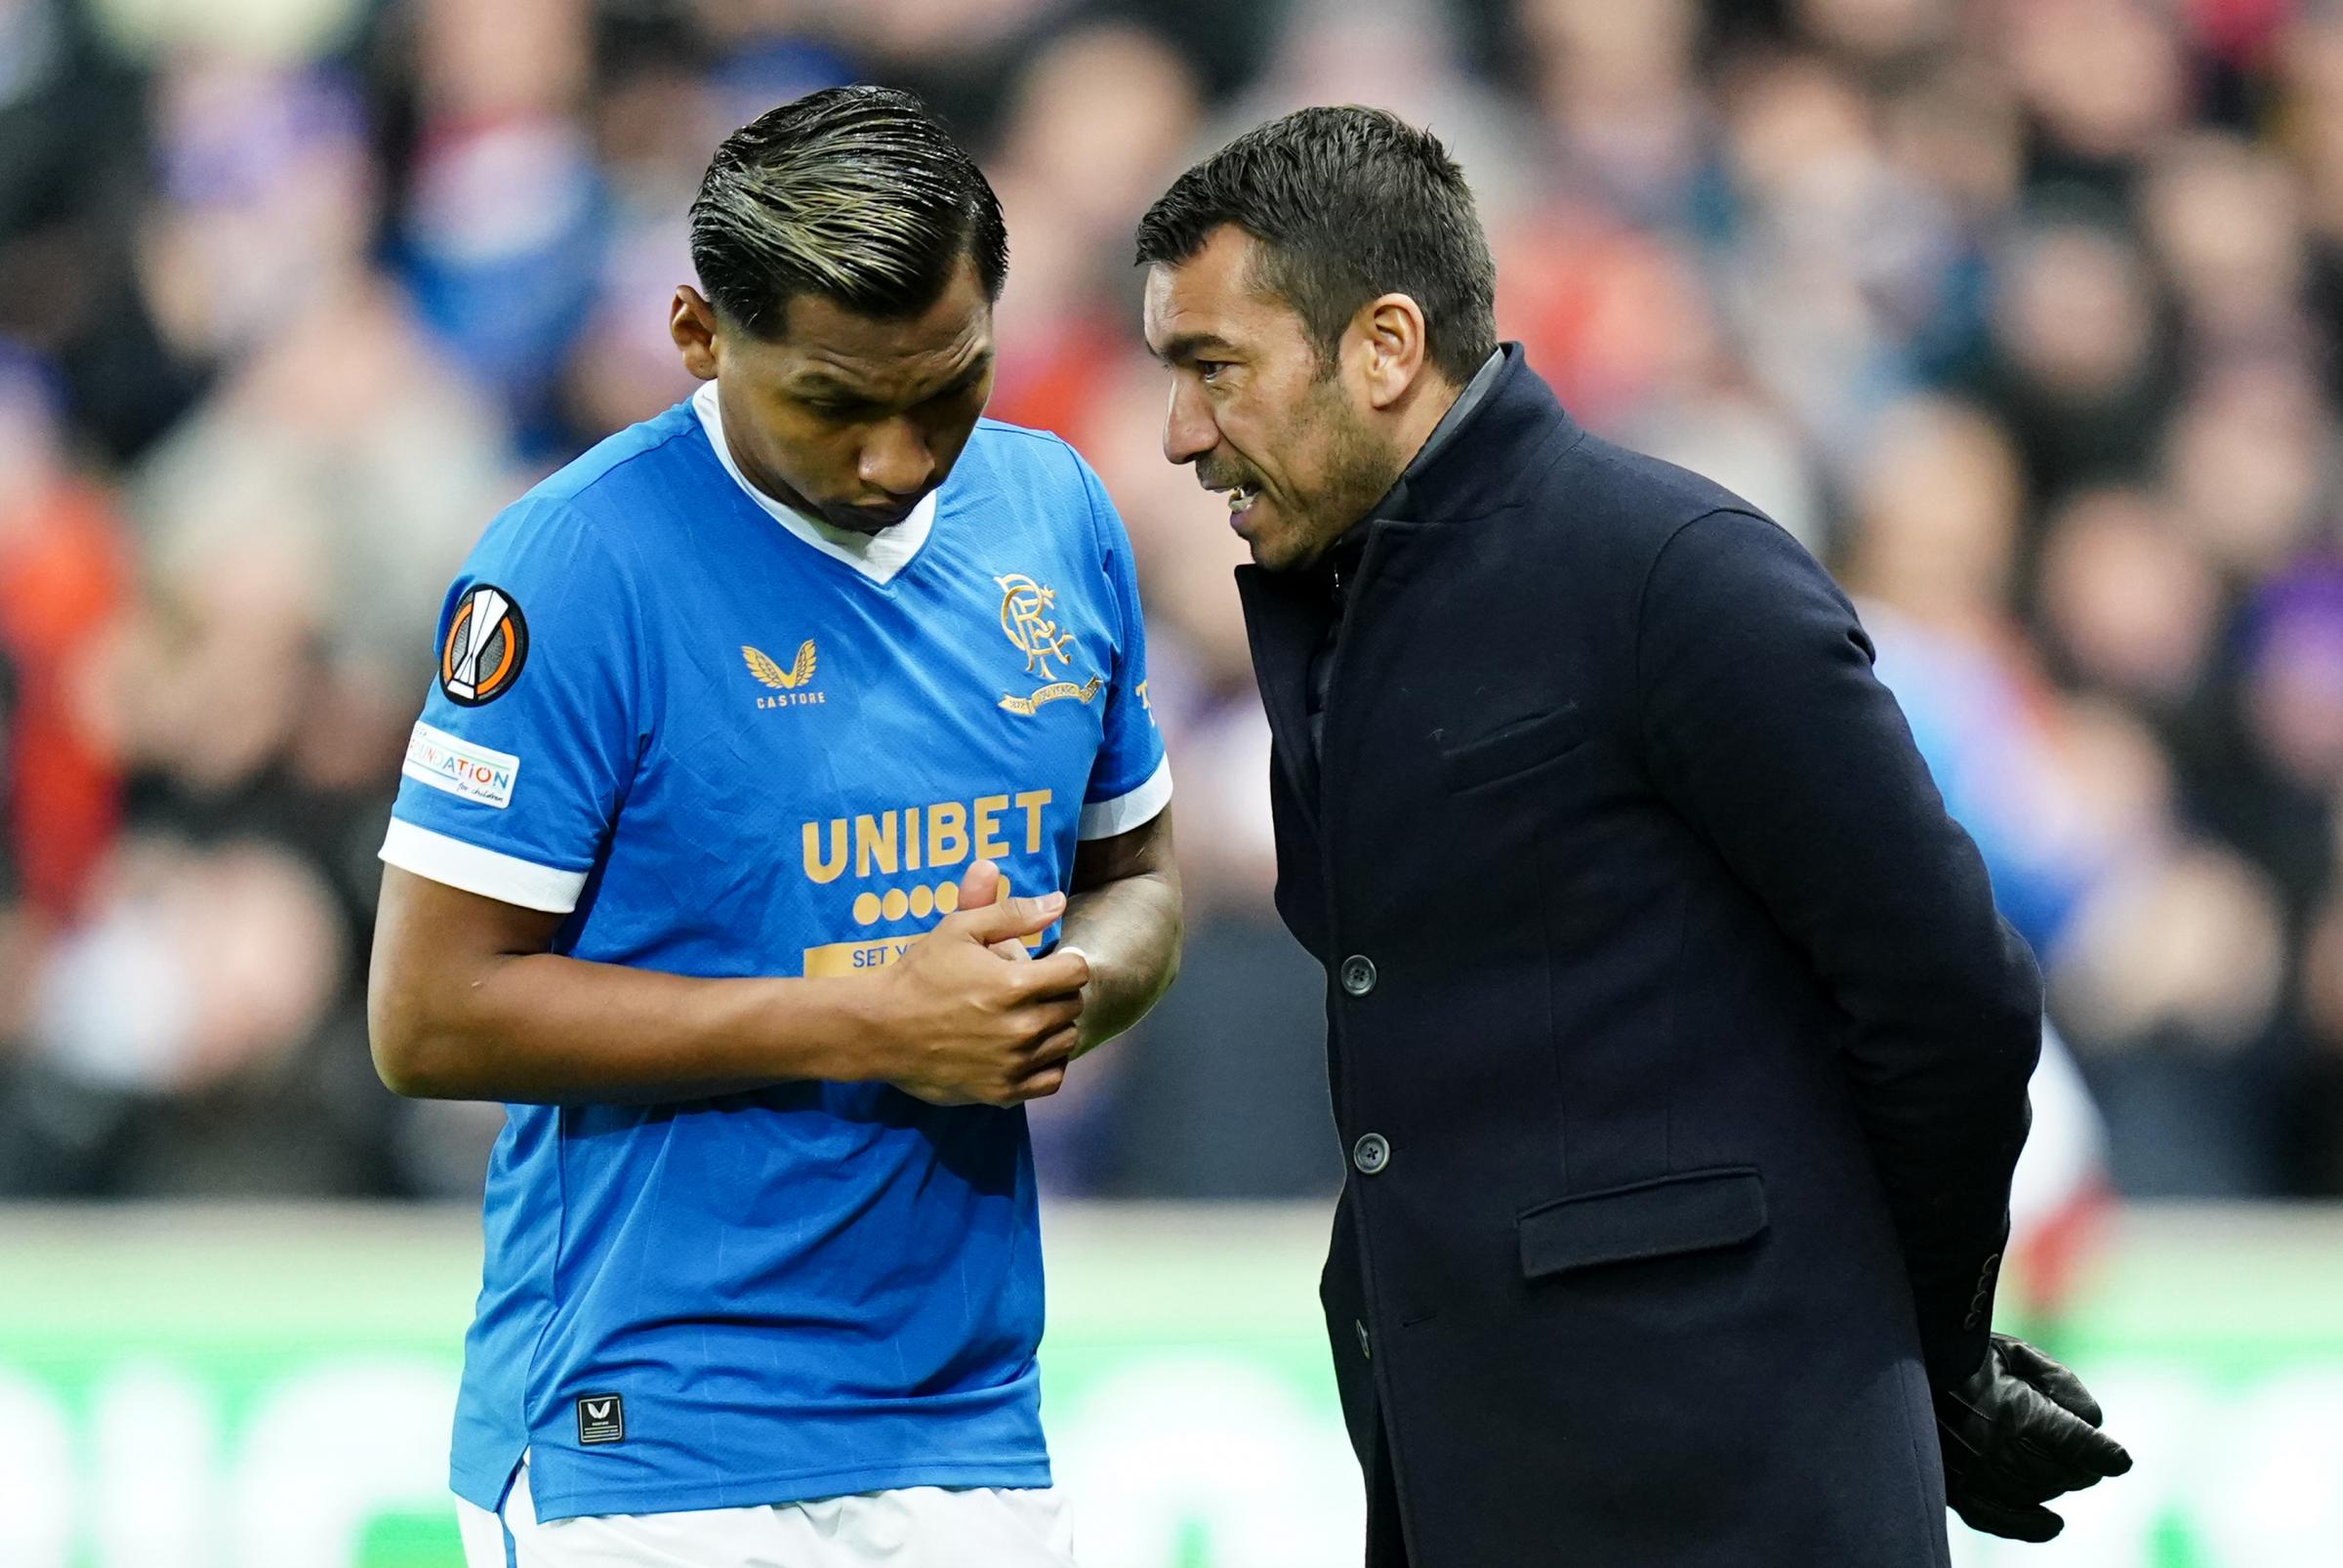 Rangers must avoid another Alfredo Morelos saga and sort out striker situation soon if Colombian doesn't commit to Ibrox